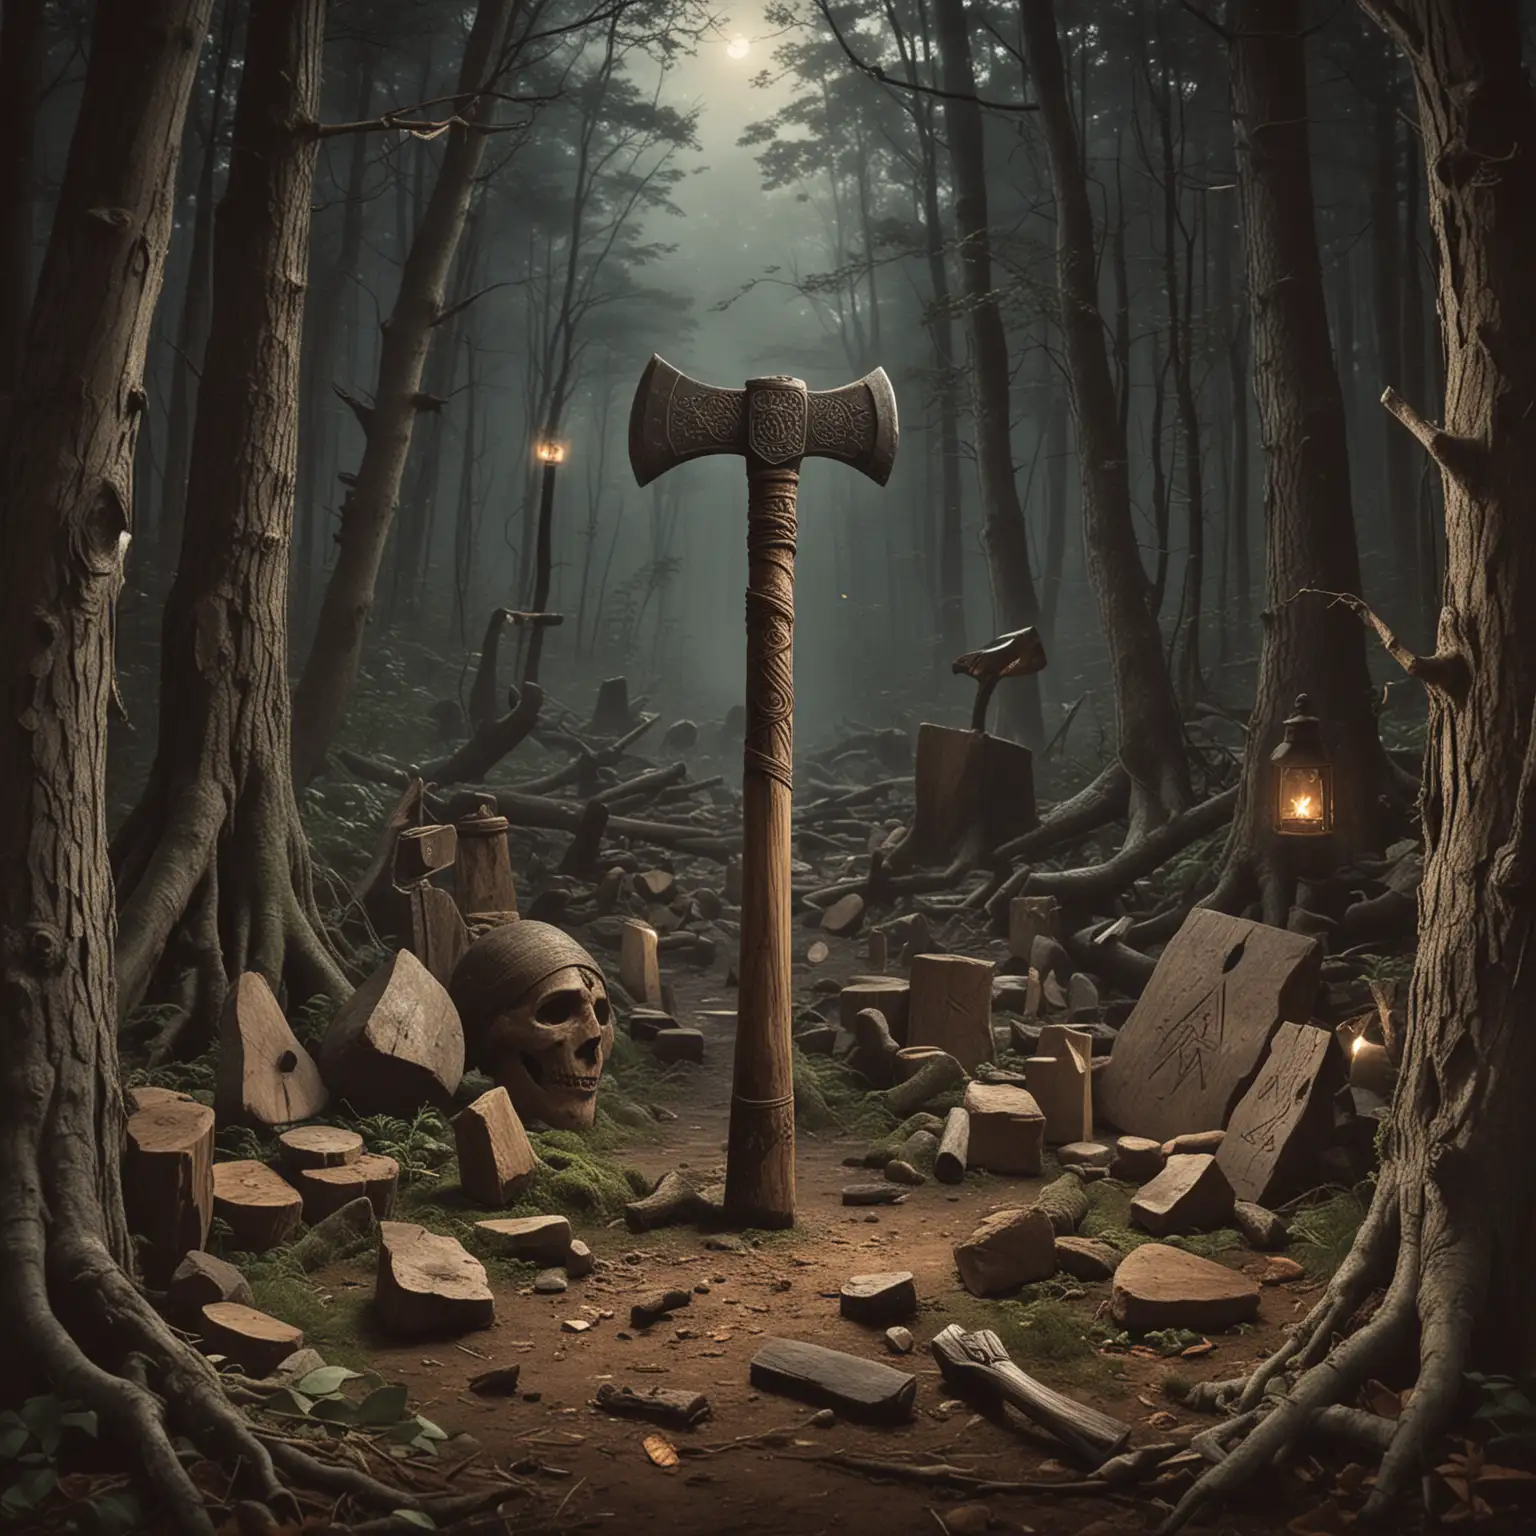 Mystical-Axe-Fortunetelling-Ritual-in-Enigmatic-Forest